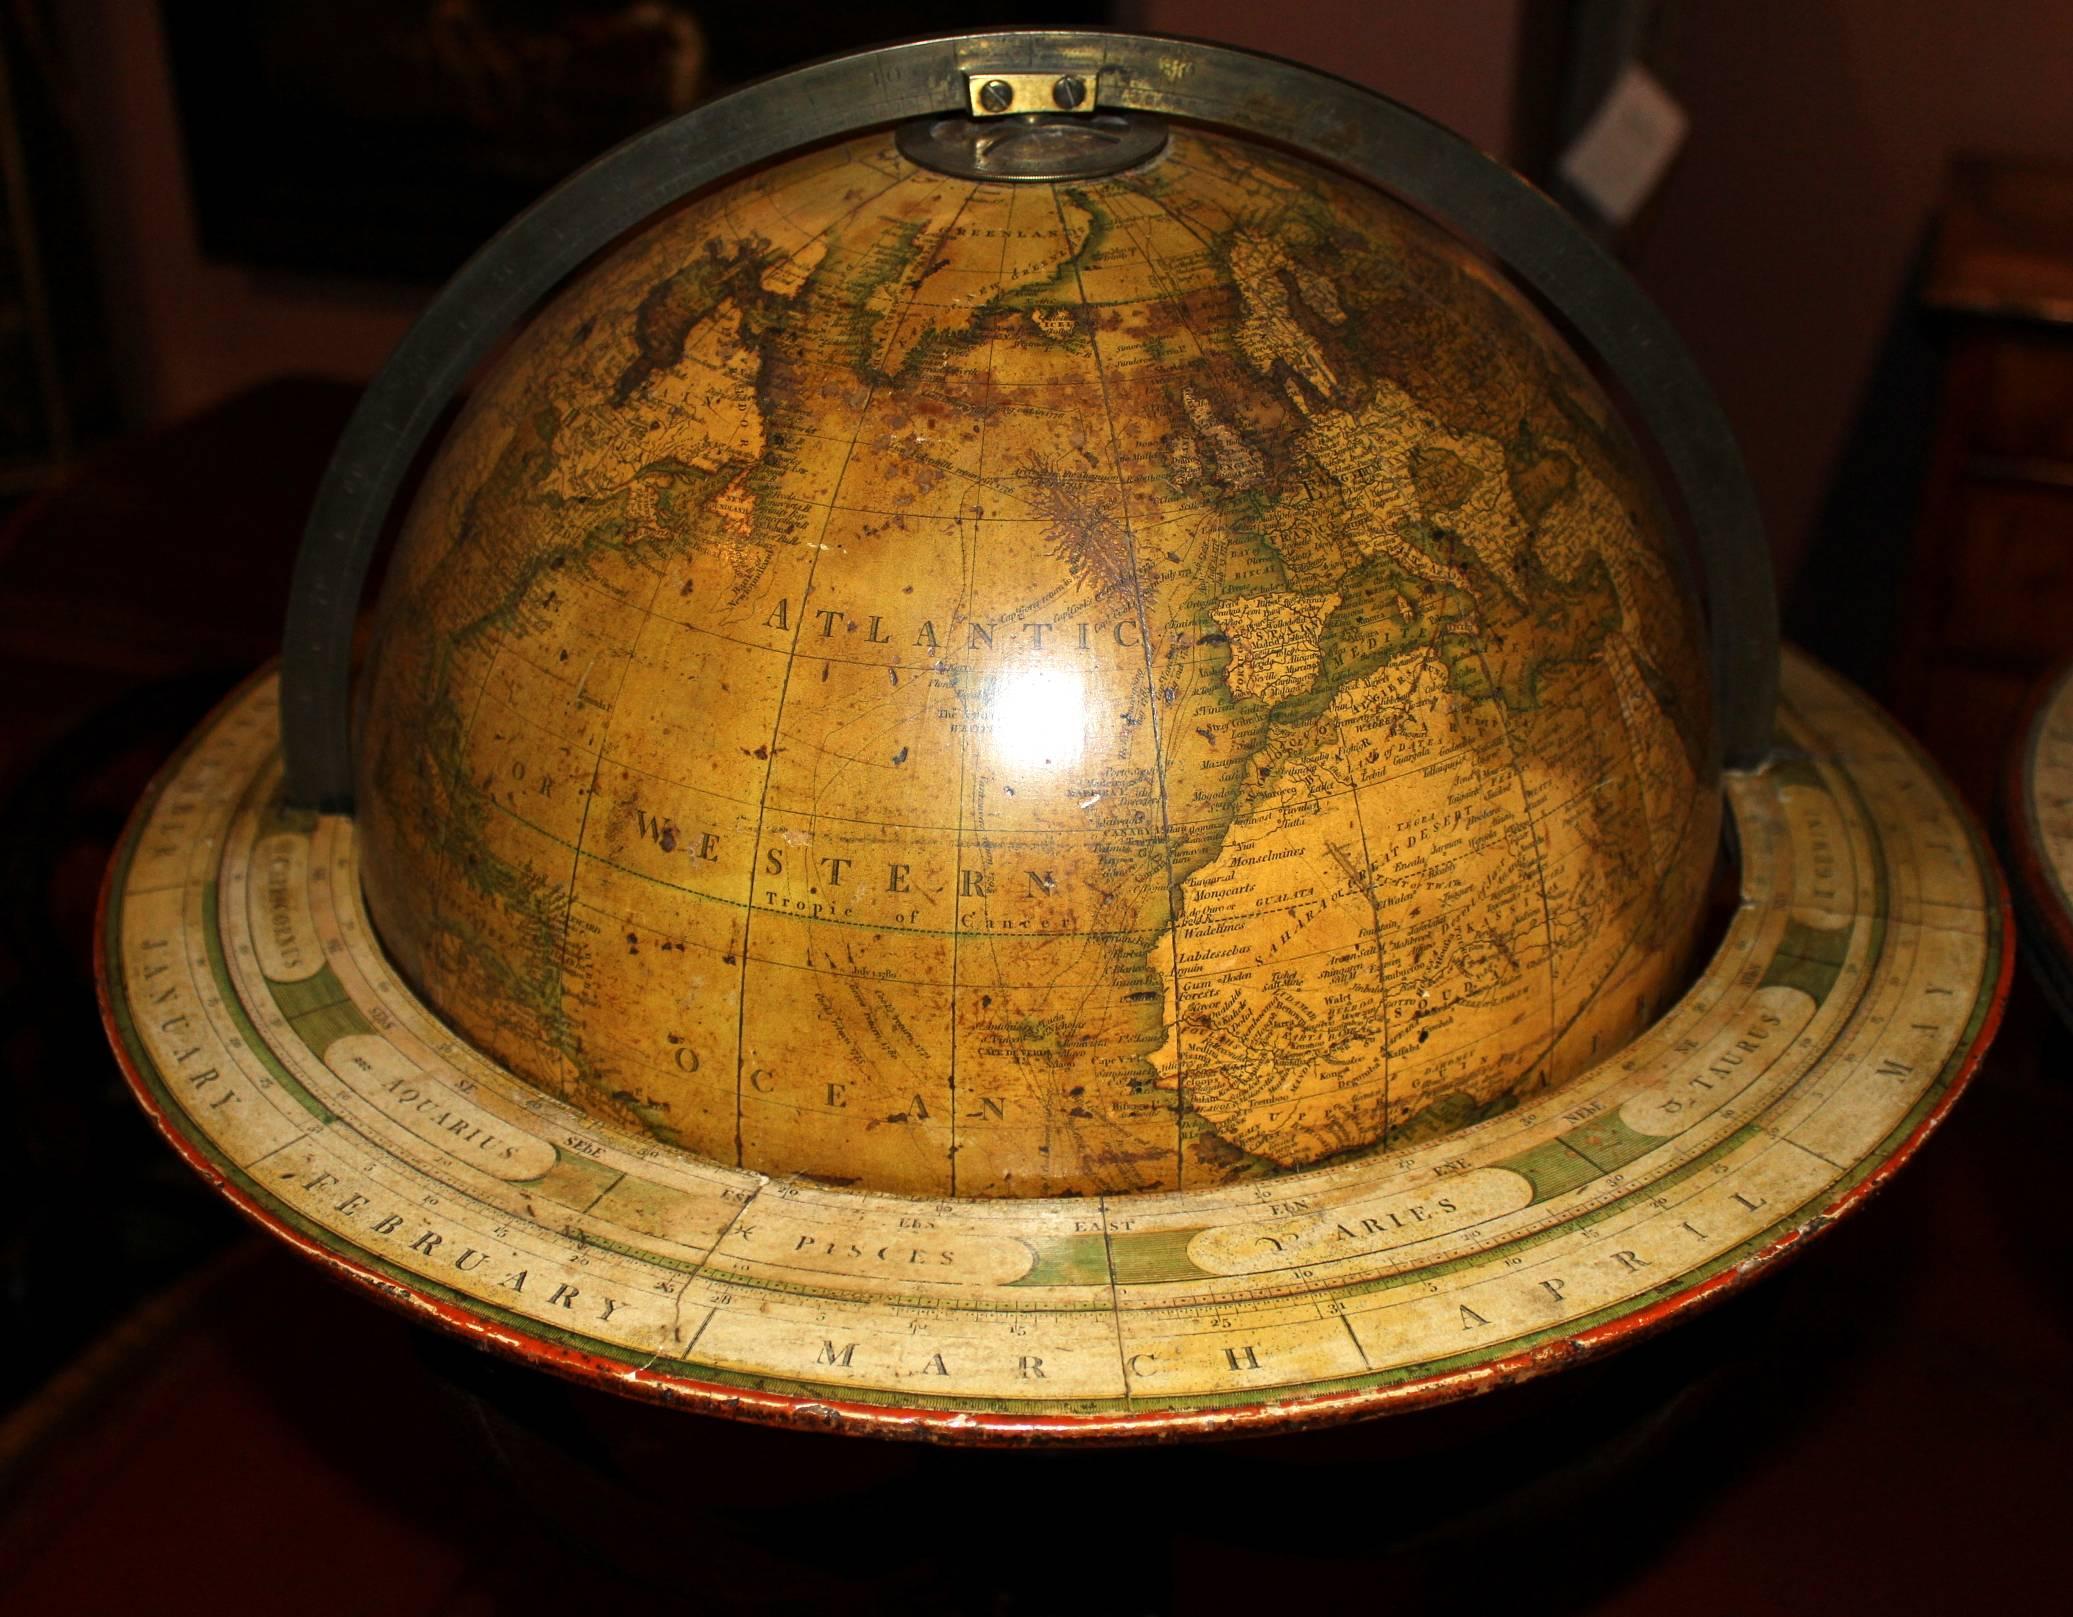 A fine near pair of 12-inch English globes including a Cary’s New Terrestrial Globe, and a Bardin’s New 12 inch British celestial globe, each circa 1800 on a mahogany tripod stand with vertical brass engraved meridian ring and a horizontal wooden